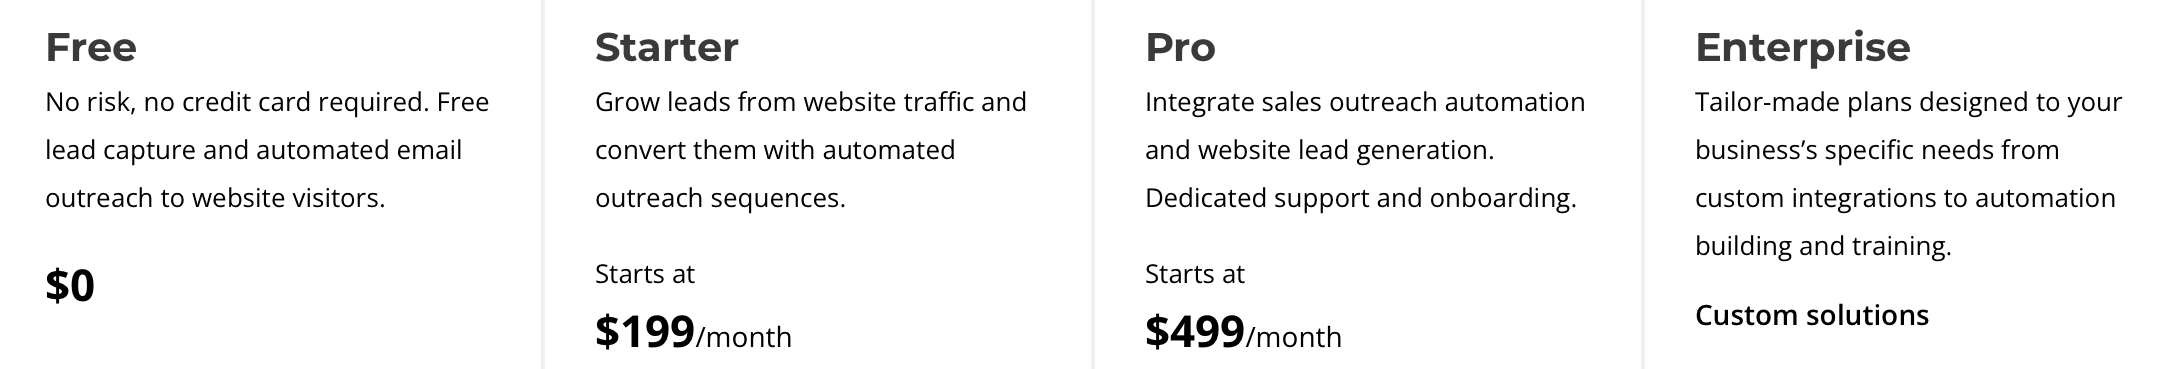 Customers.ai%20pricing.png